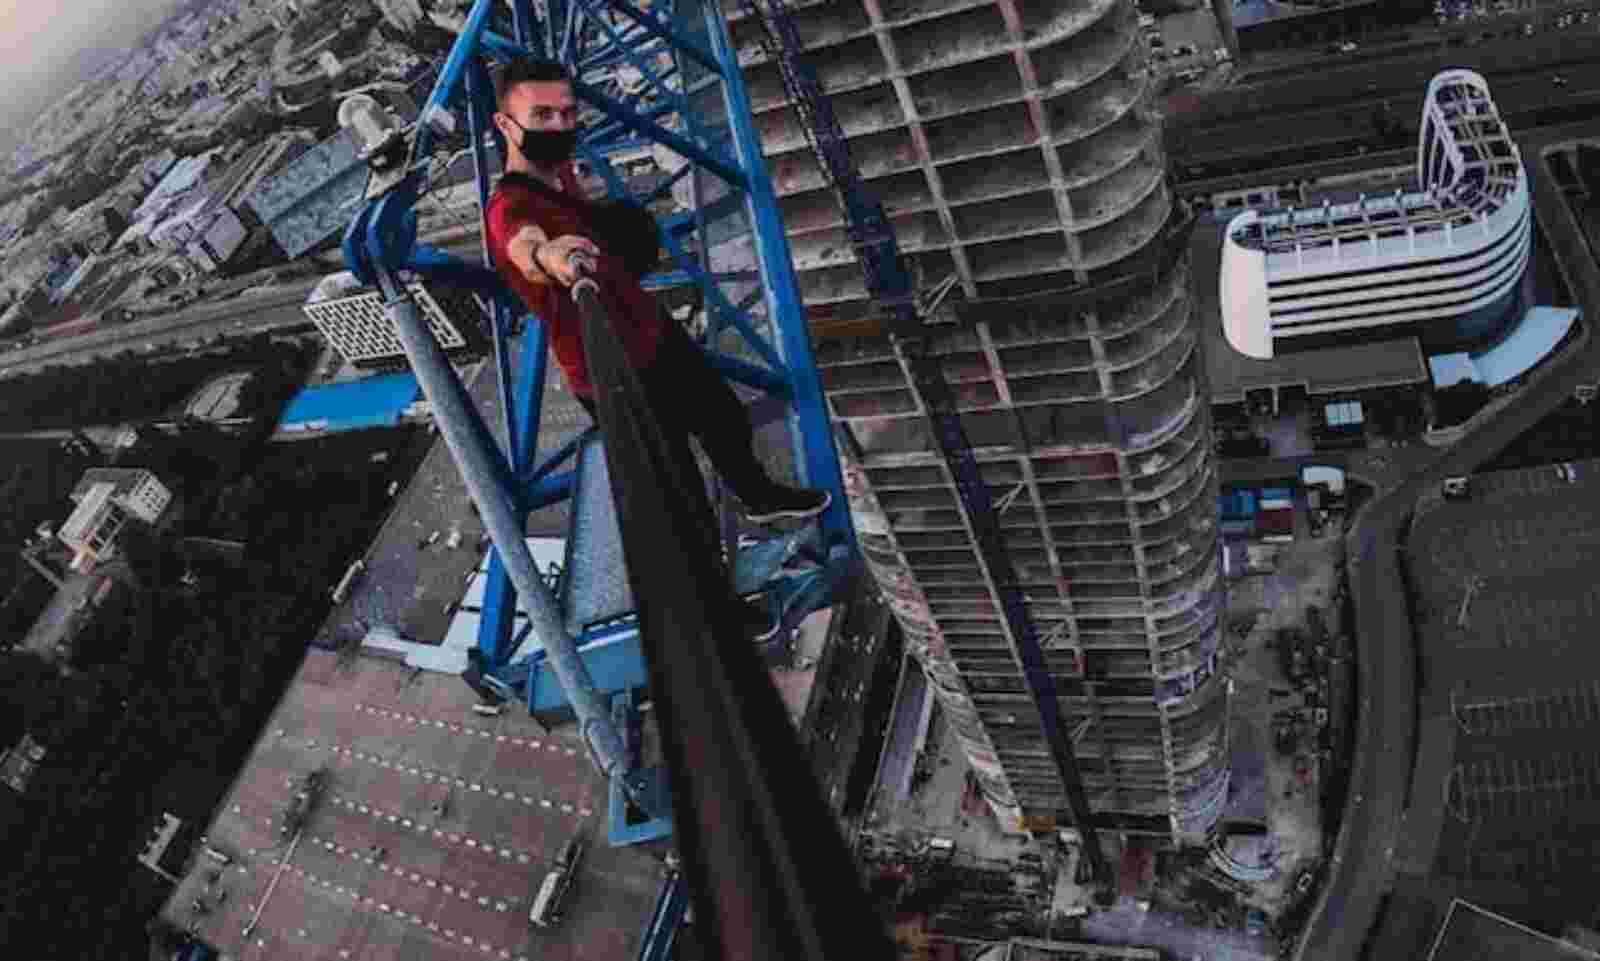 Man known for stunts dies after falling from 68-storey building